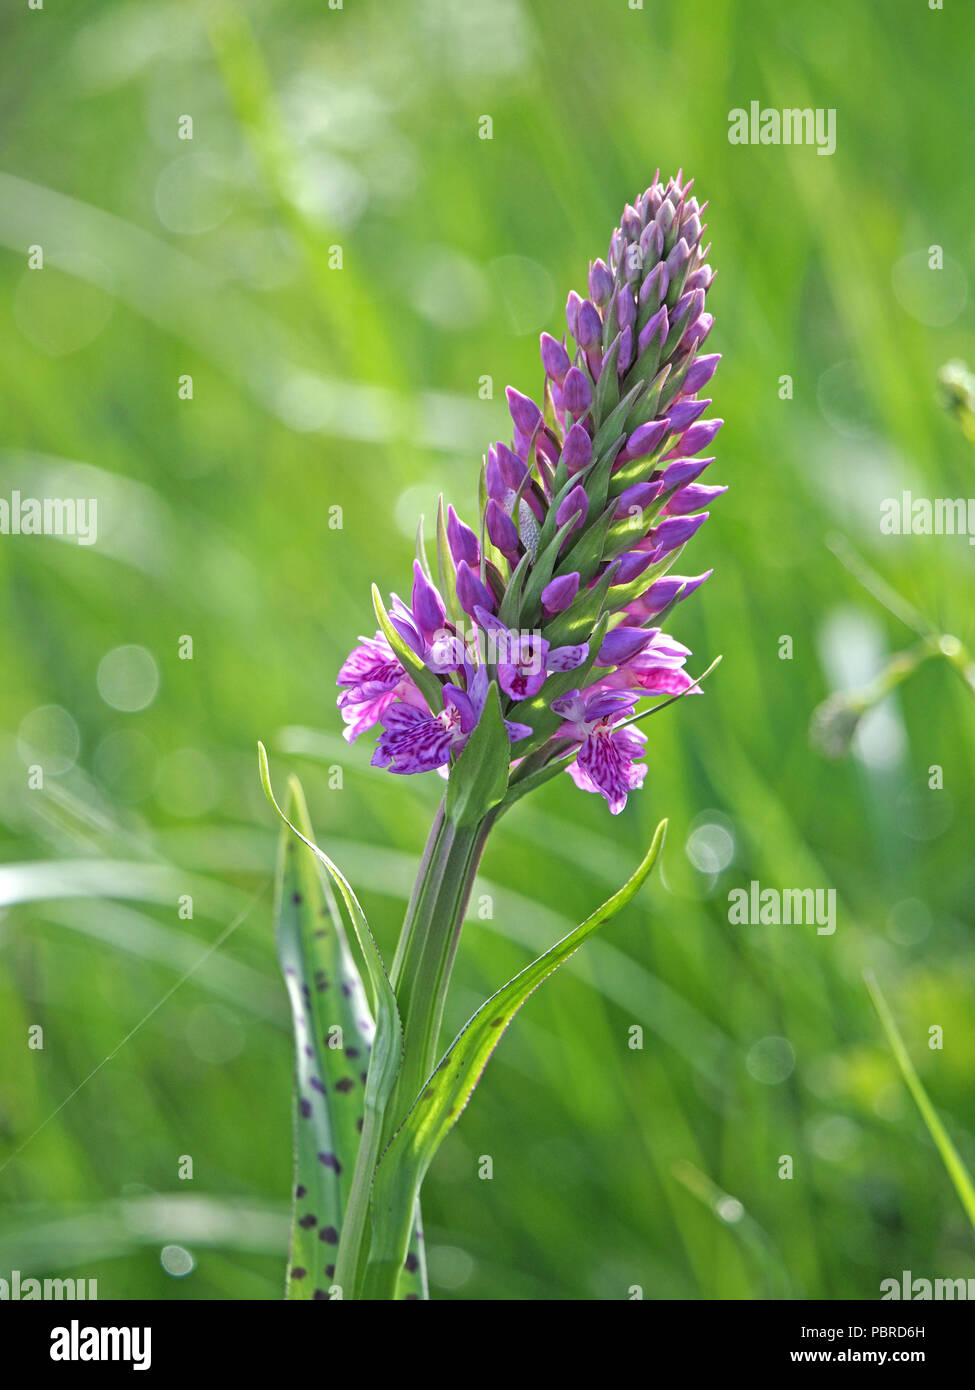 tall emergent flowerspike of Northern Marsh Orchid hybrid (Dactylorhiza purpurella x) with spotted leaves in Cumbria, England, UK Stock Photo